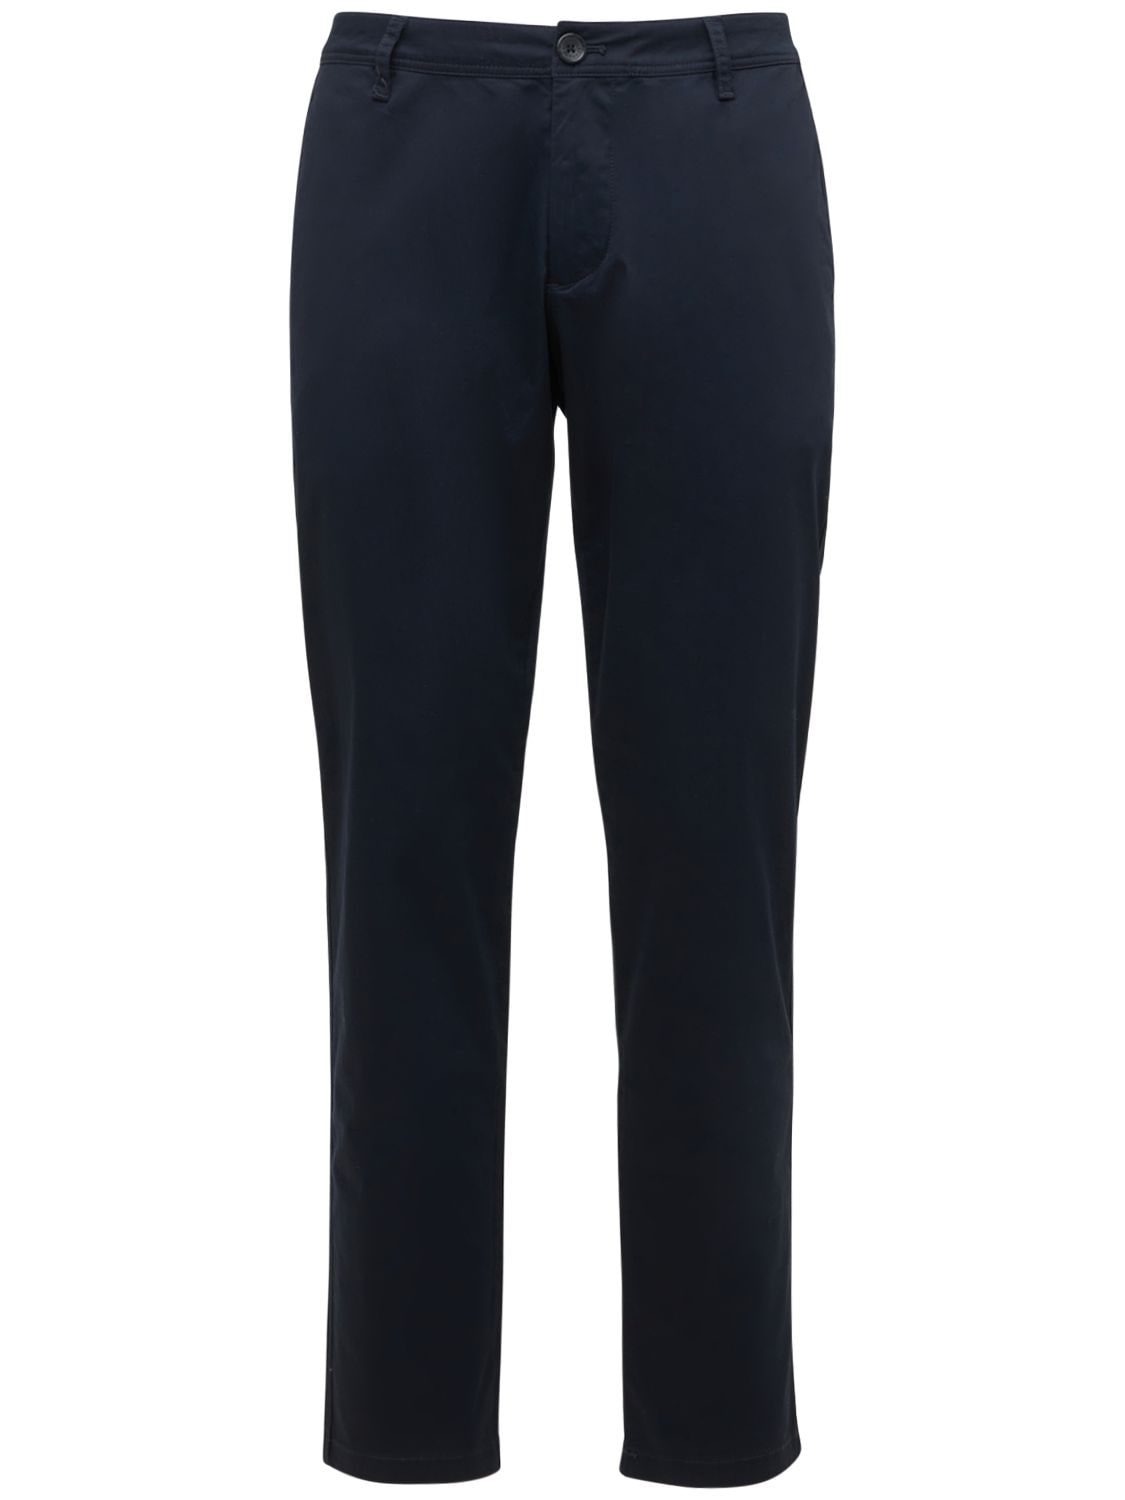 Armani Exchange Stretch Cotton Twill Pants In Navy